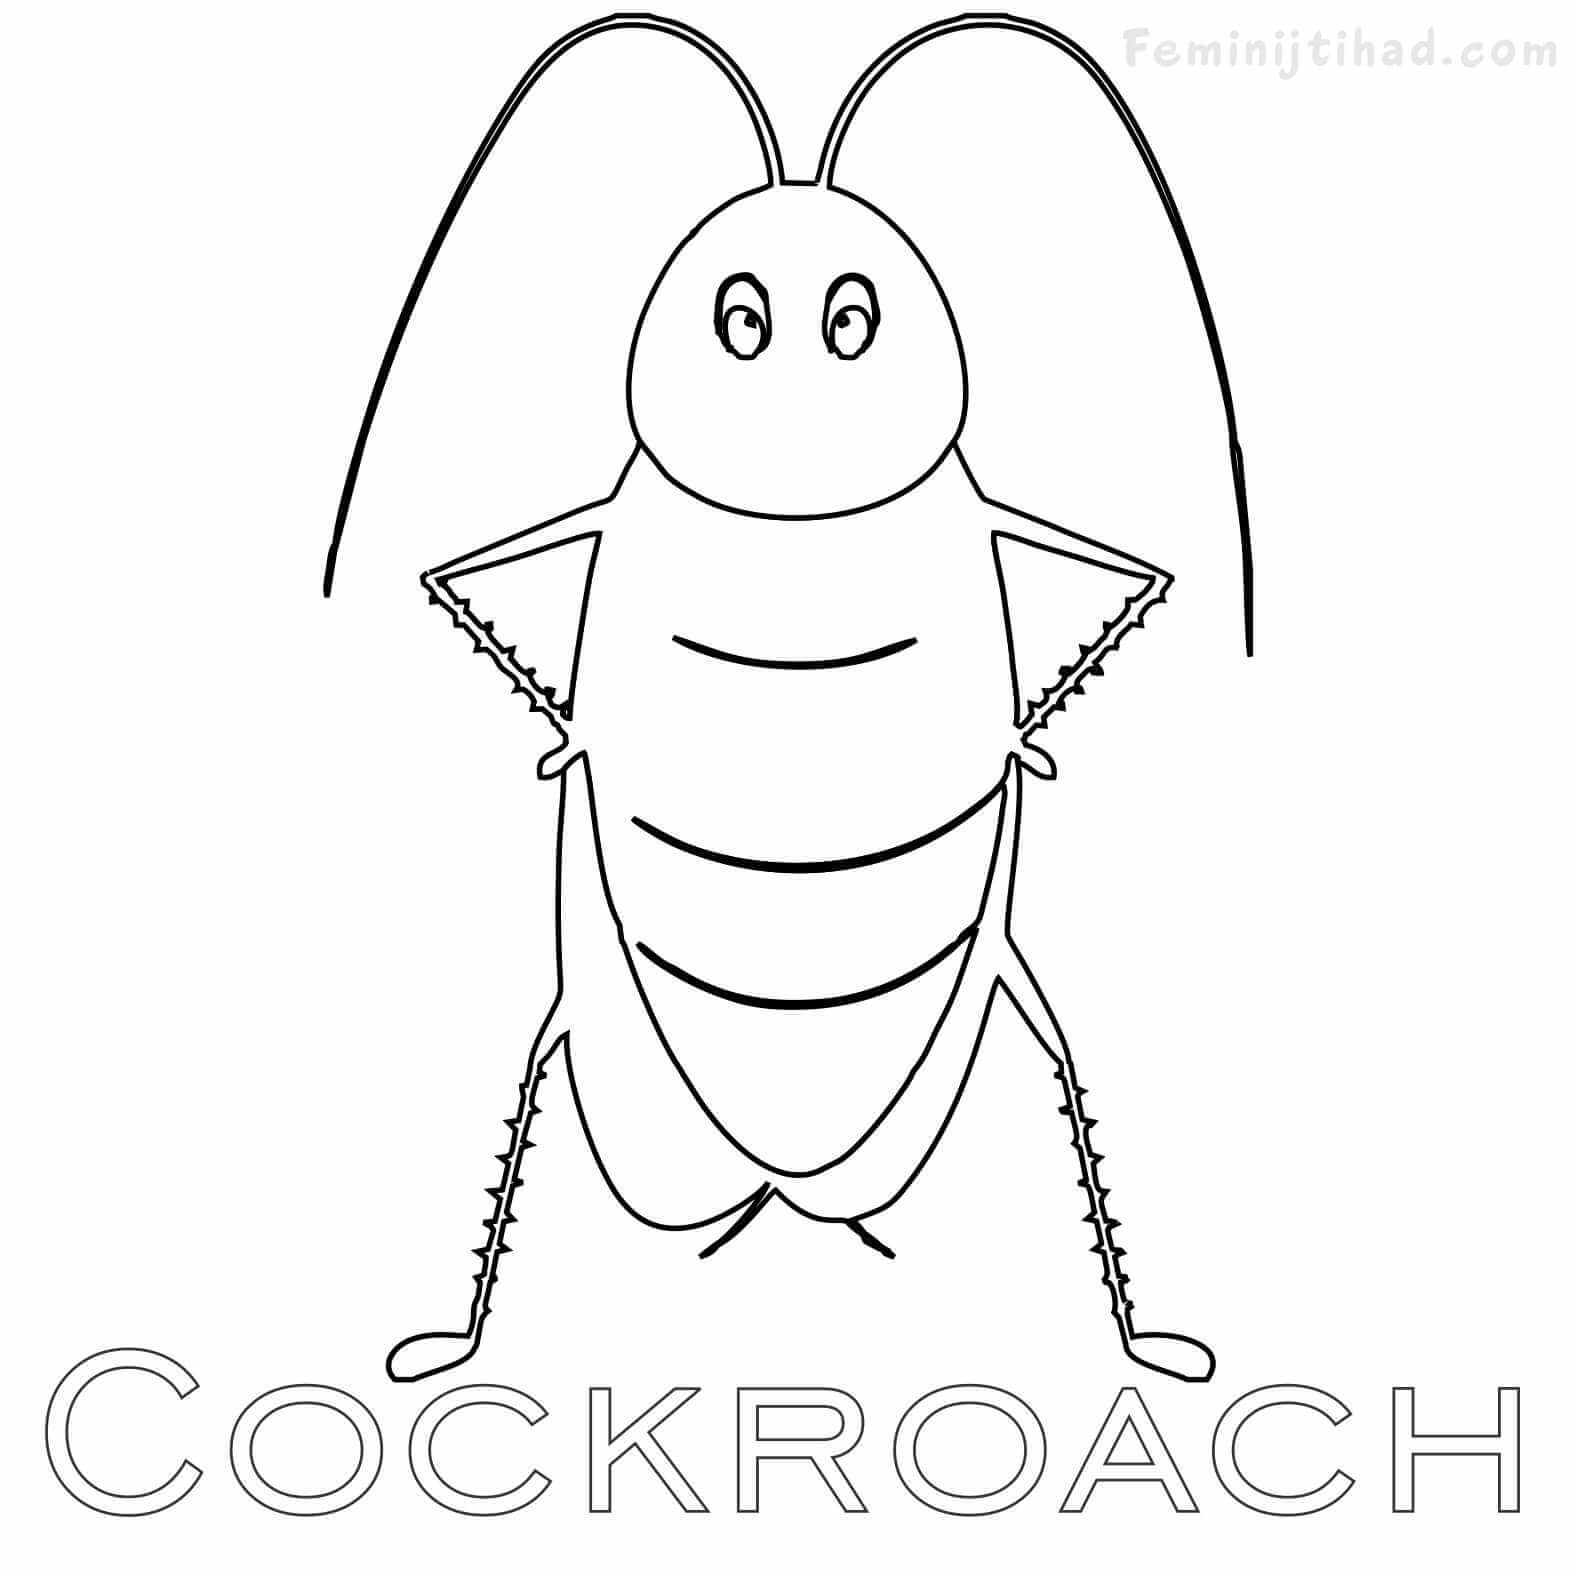 cockroach coloring page easy